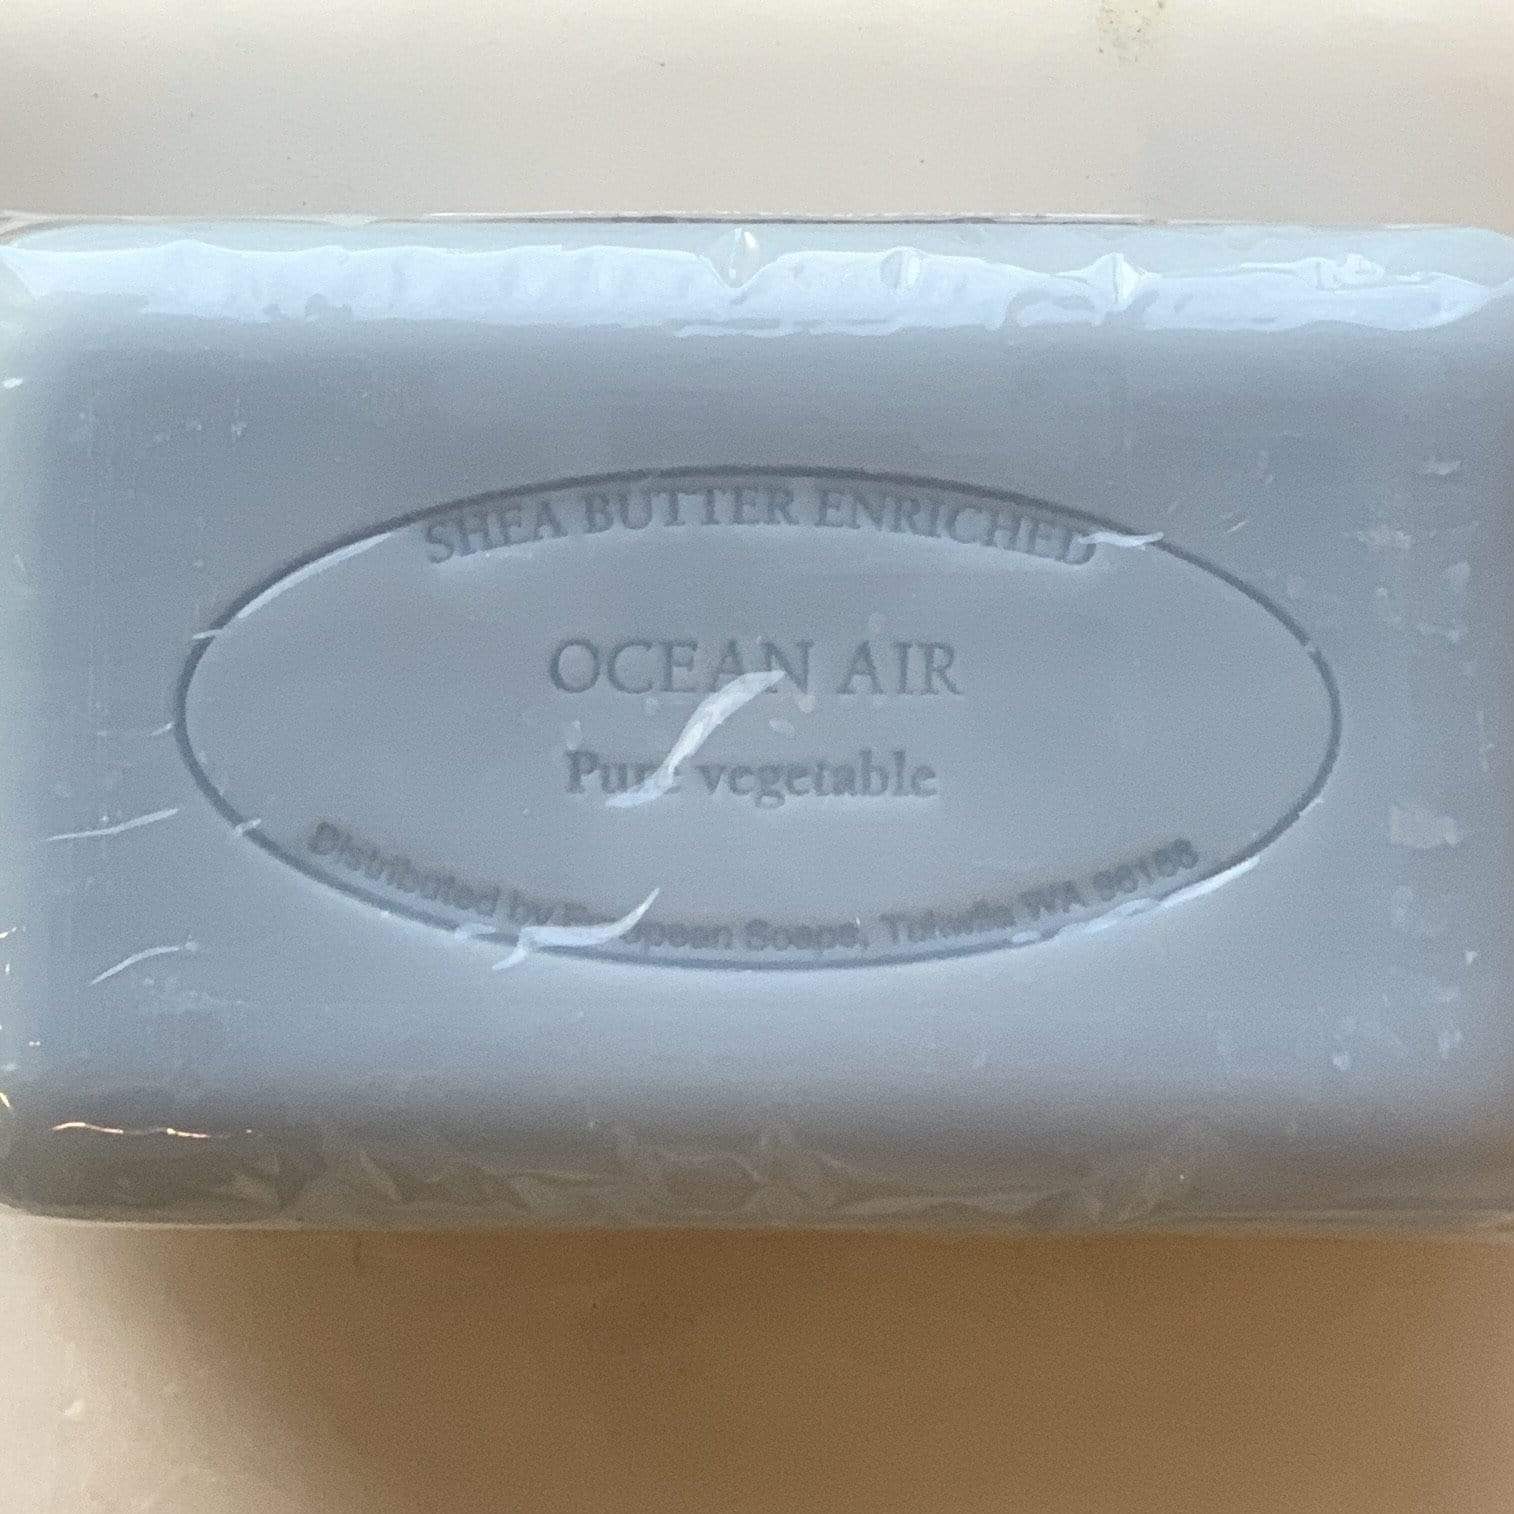 Ocean Air French Milled Soap - 150g - PORCH